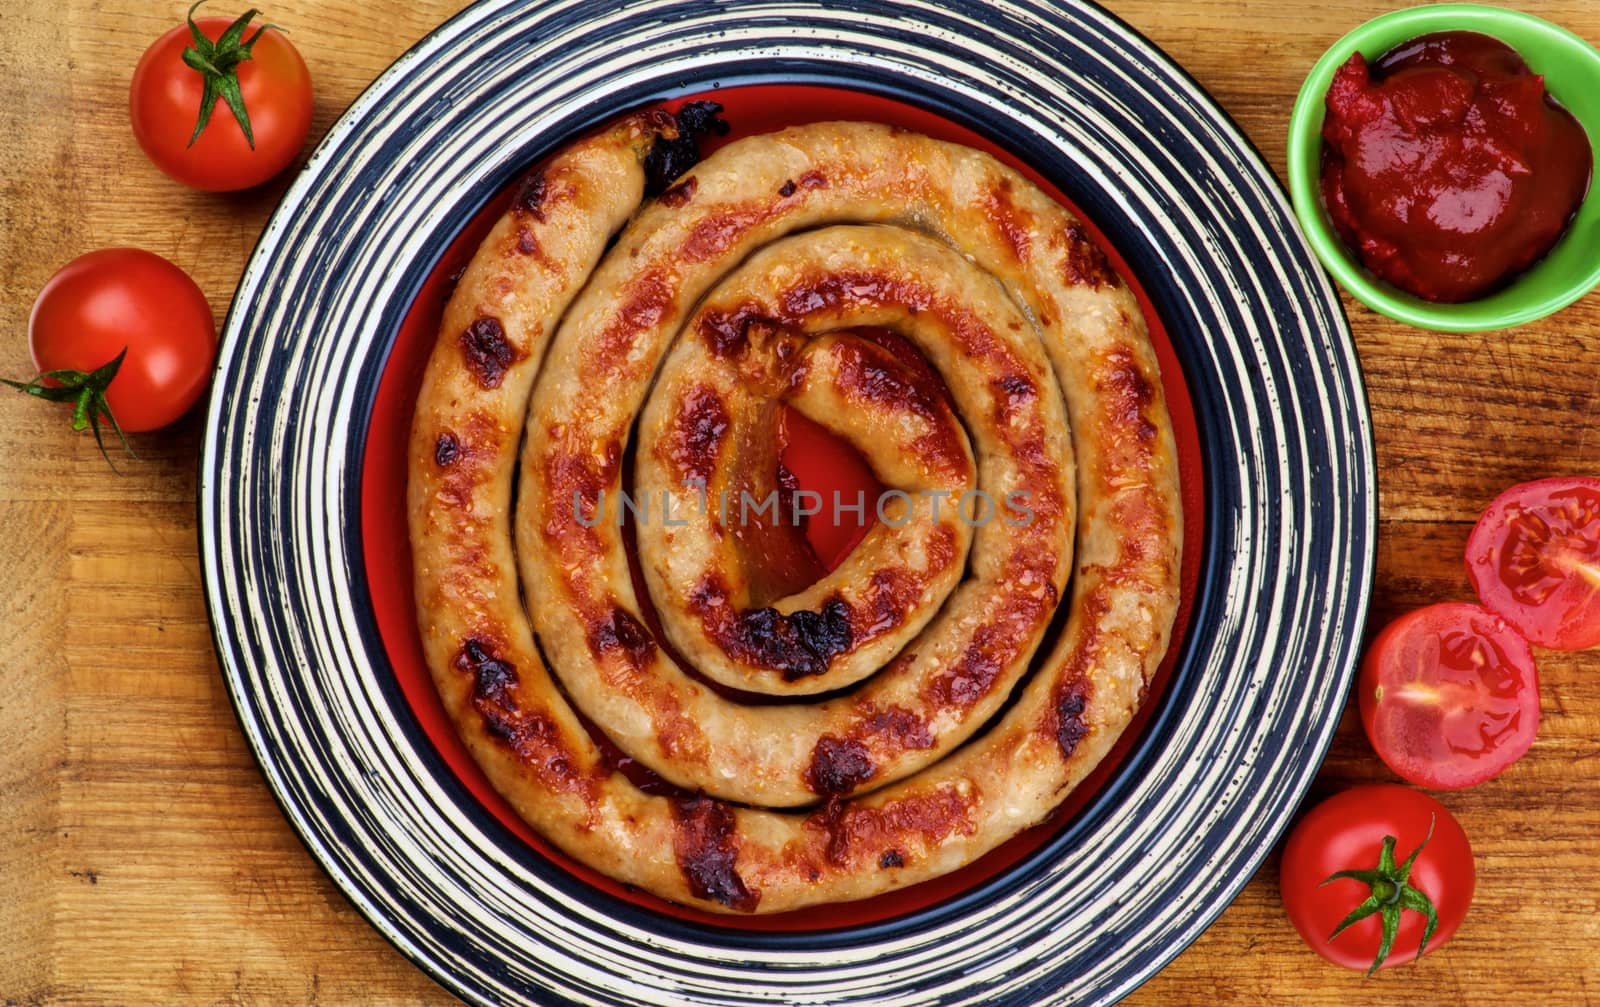 Delicious Grilled Spiral Sausage on Striped Plate with Ketchup and Fresh Cherry Tomatoes closeup on Wooden Cutting Board. Top View 